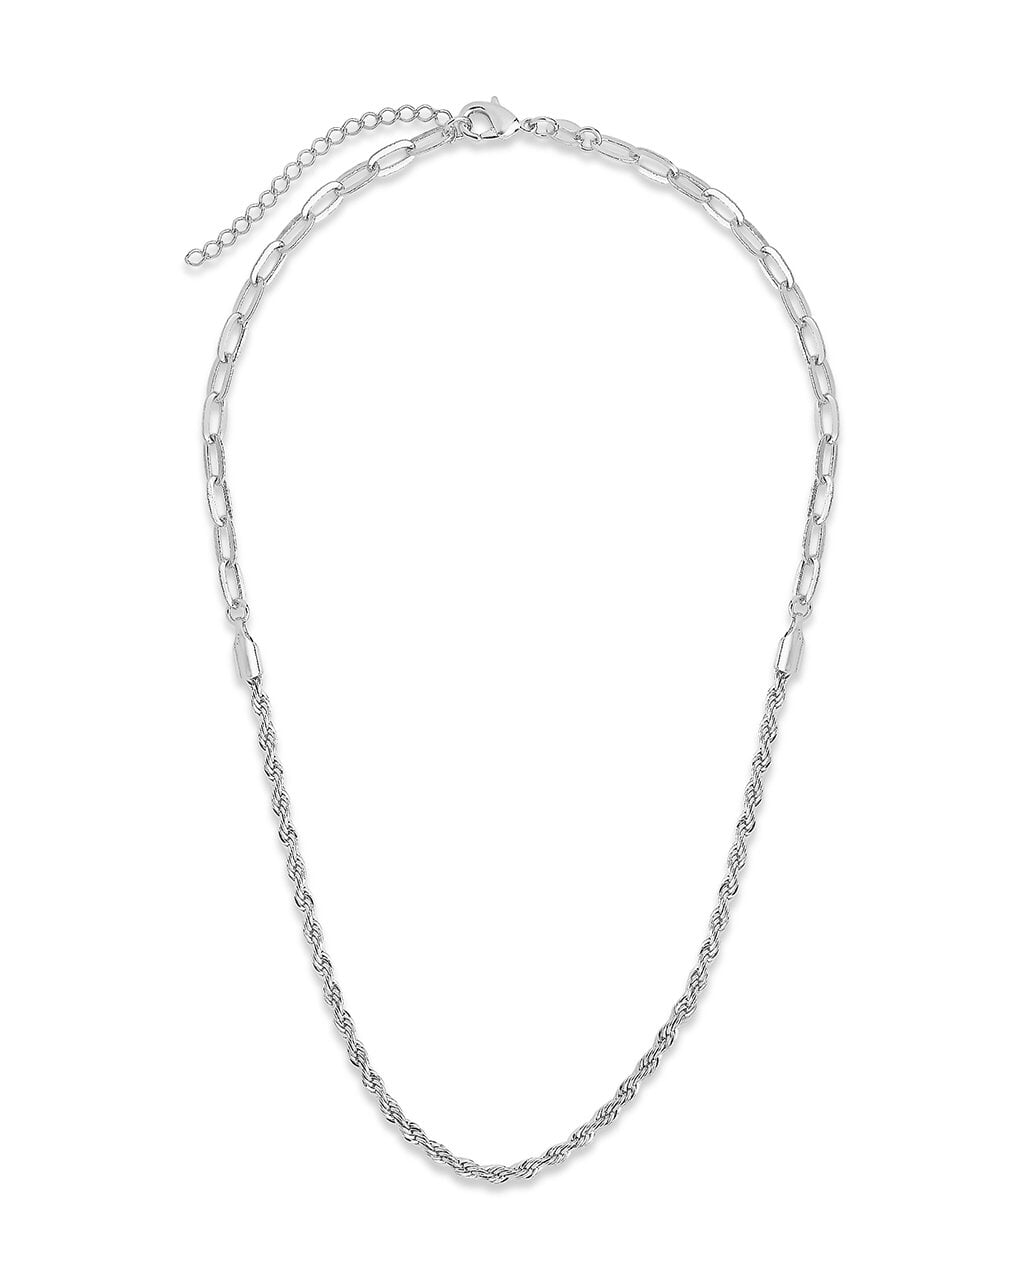 Men's Rope Twist Chain Necklace Necklace Sterling Forever 